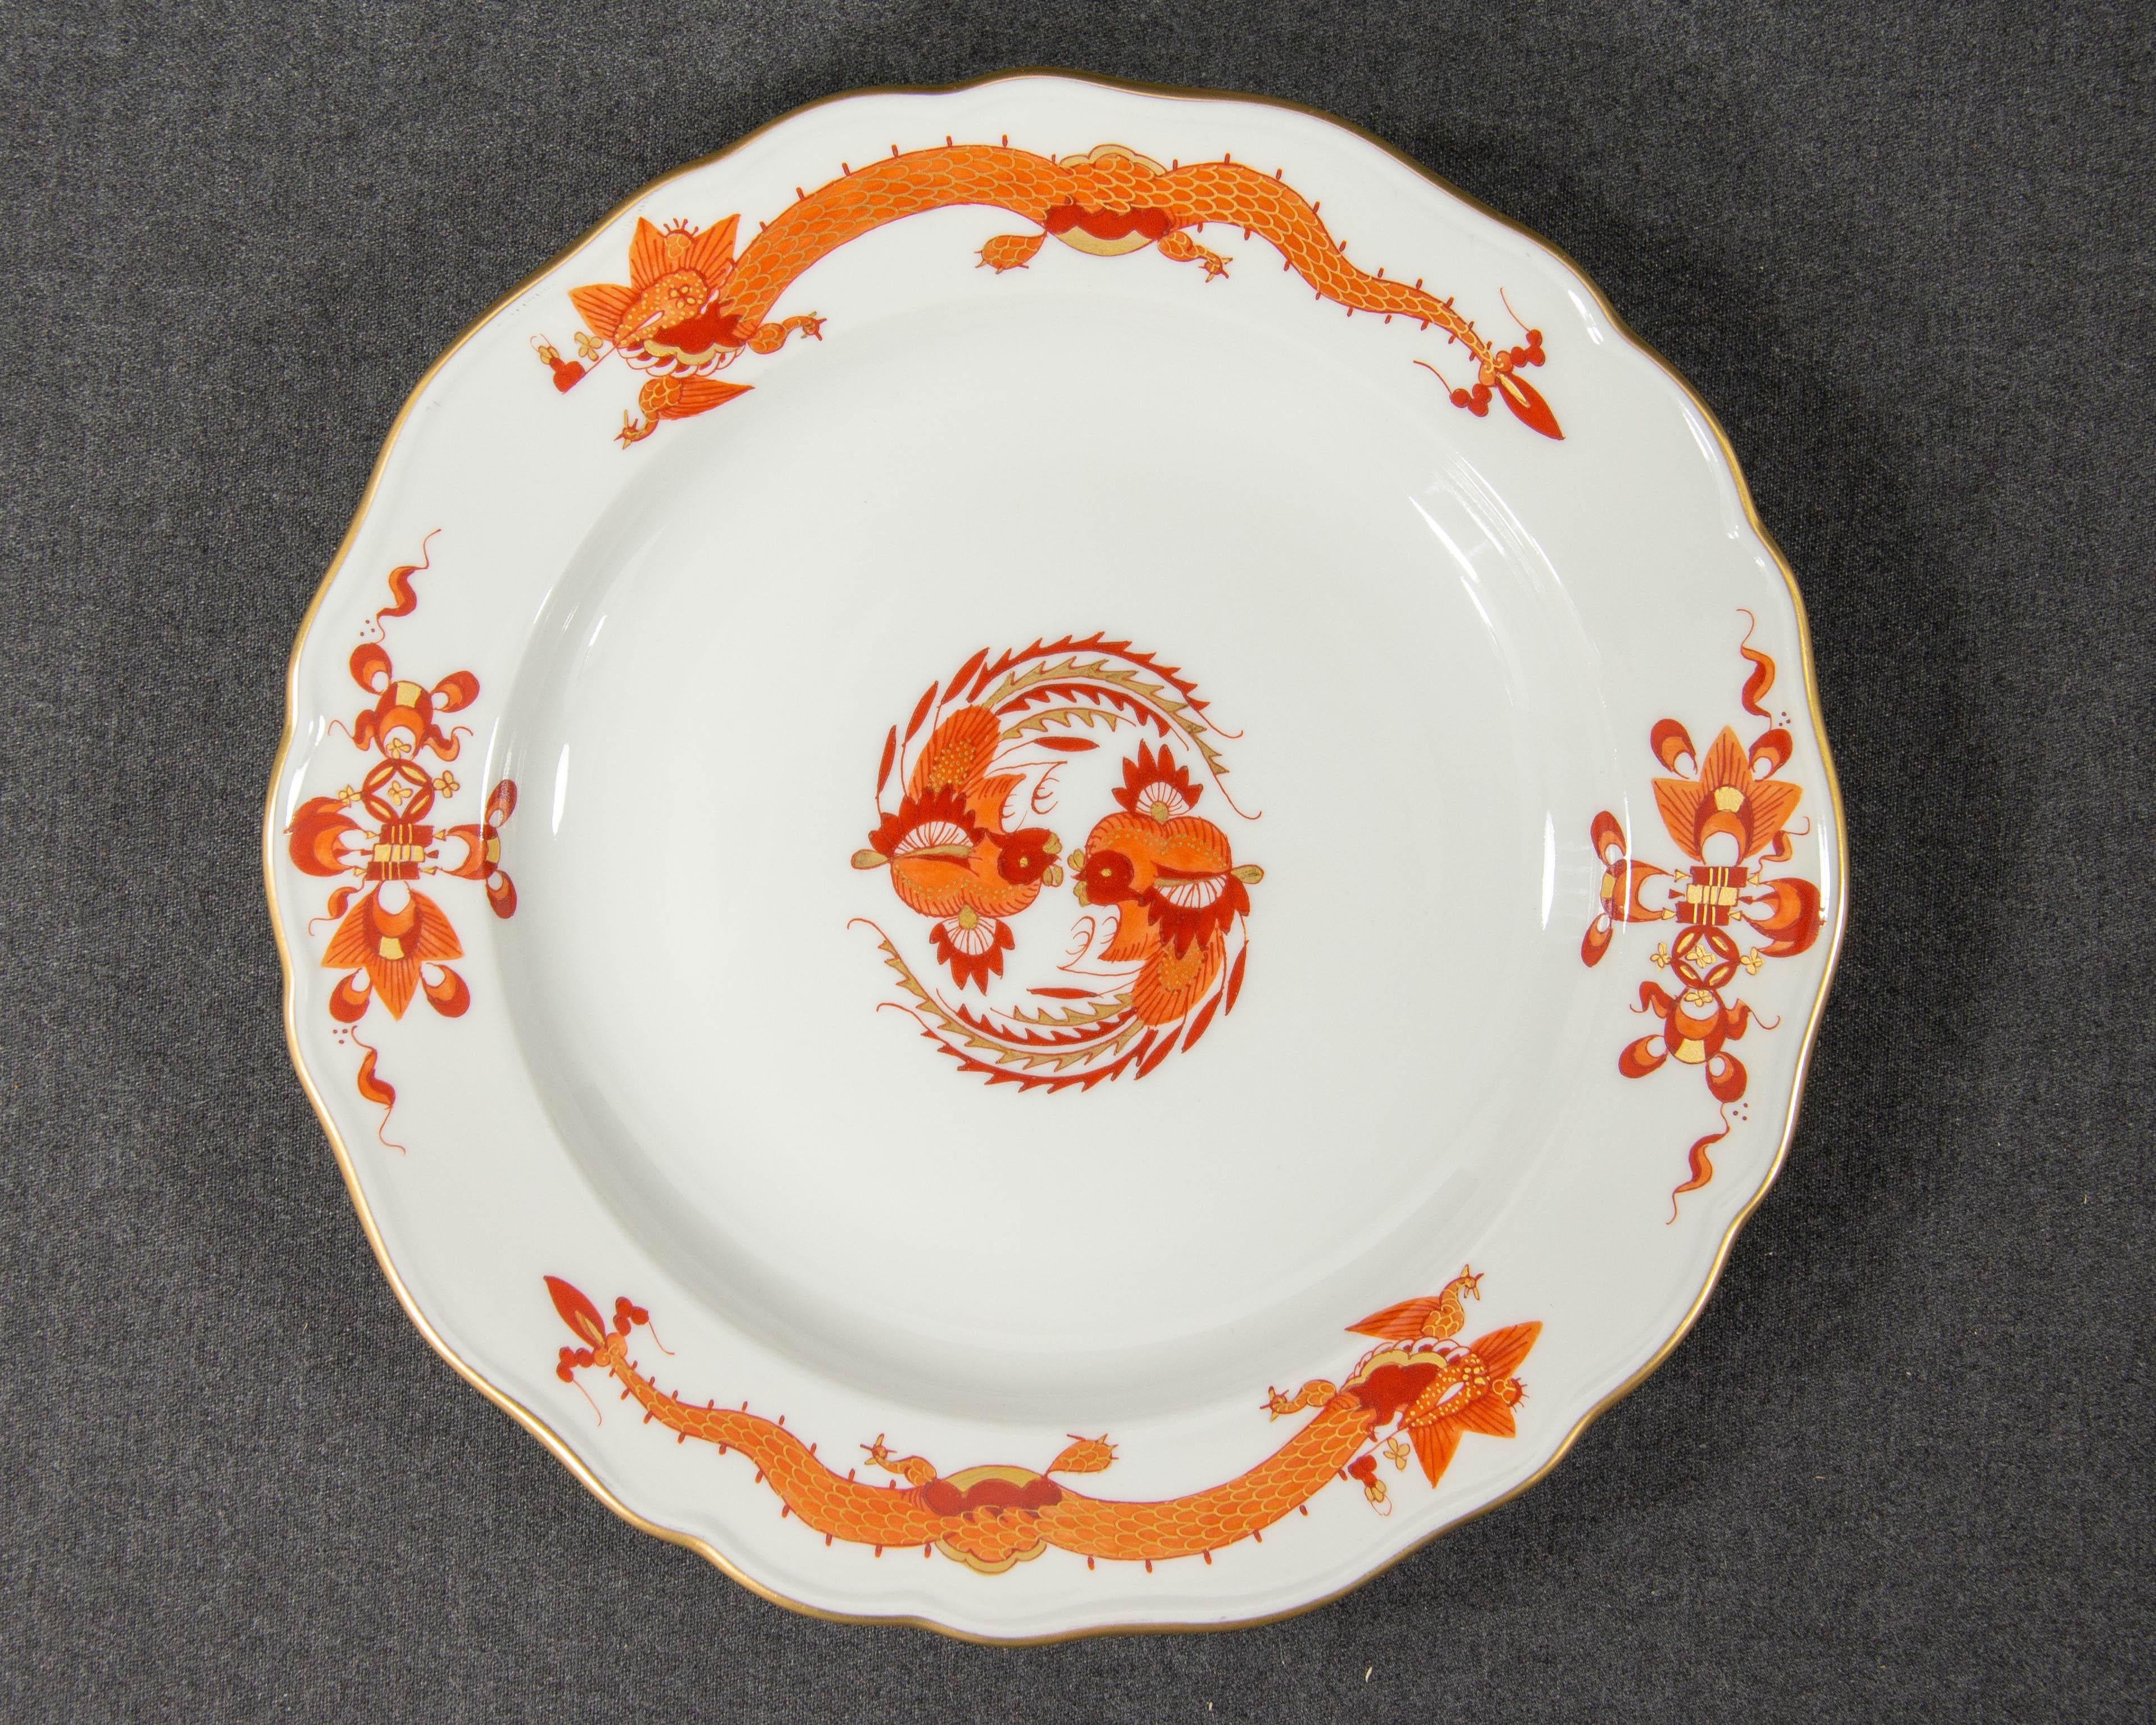 A Meissen Red Dragon Breakfast plate.

The plate was made by Meissen and has been decorated with the 'Court Dragon' pattern in red. The item was made in the 2nd half of the 20th century.

The item is made of white porcelain and is hand painted